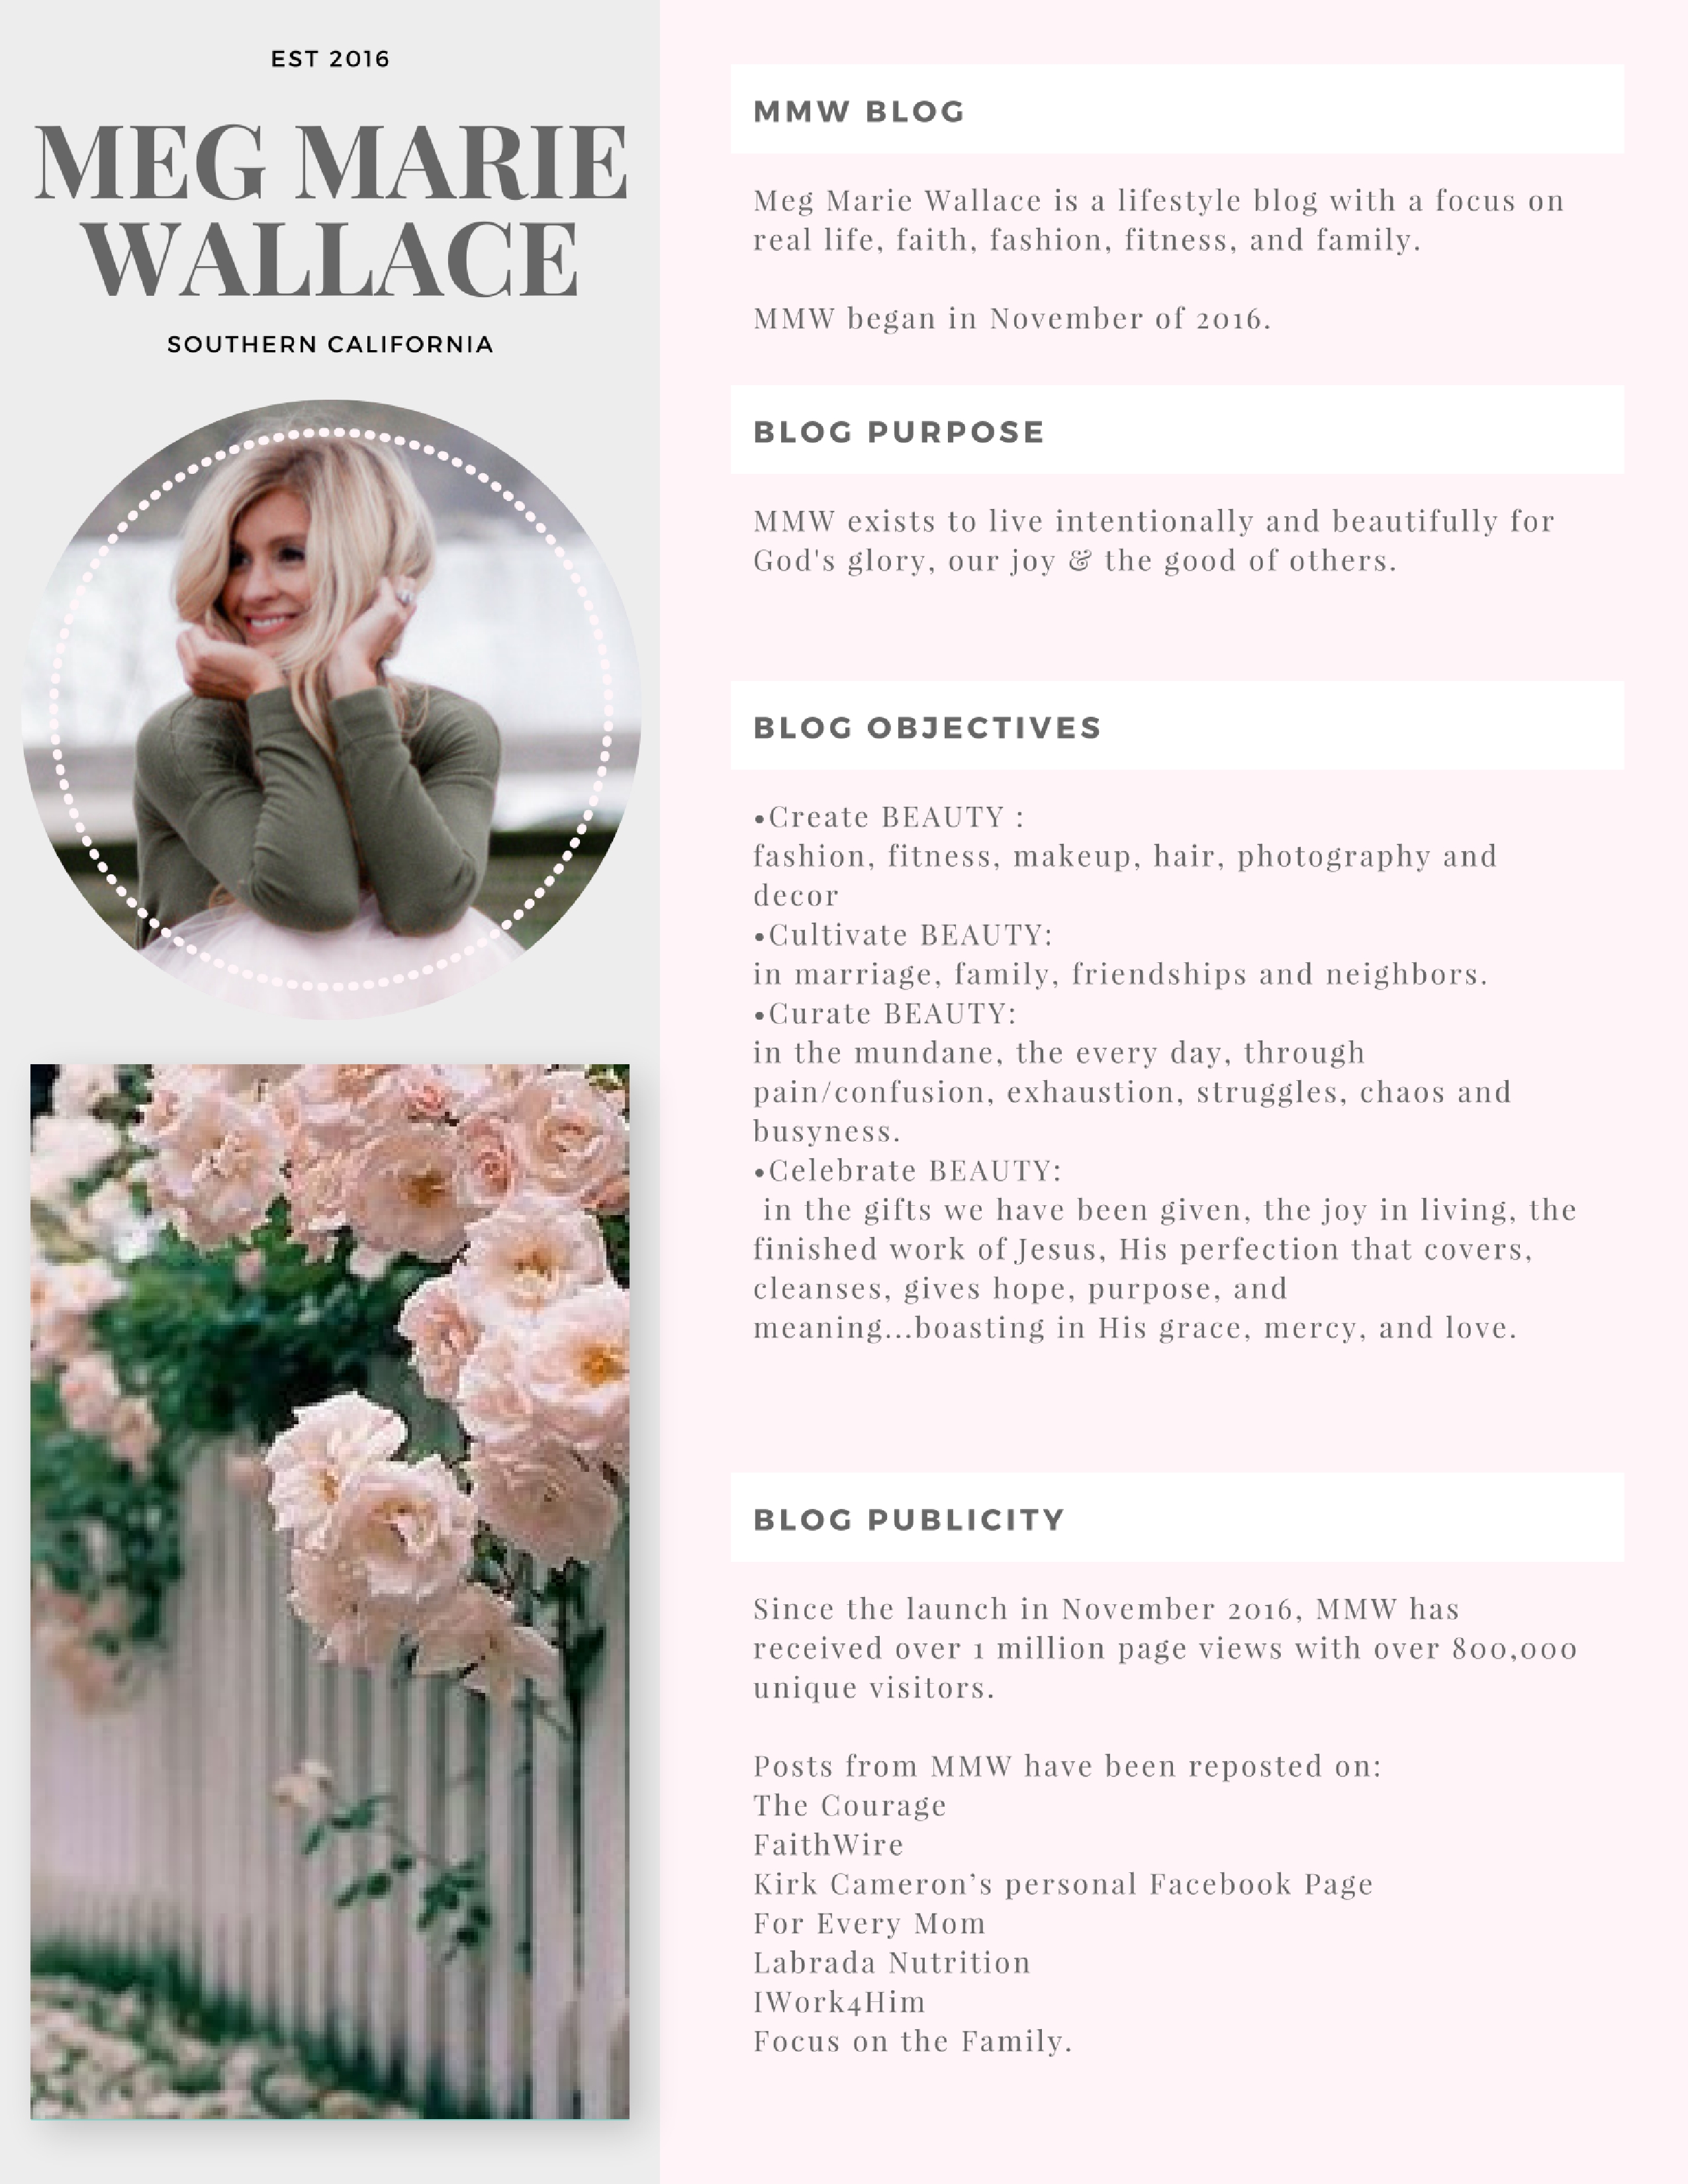 Meg Marie Wallace media pages